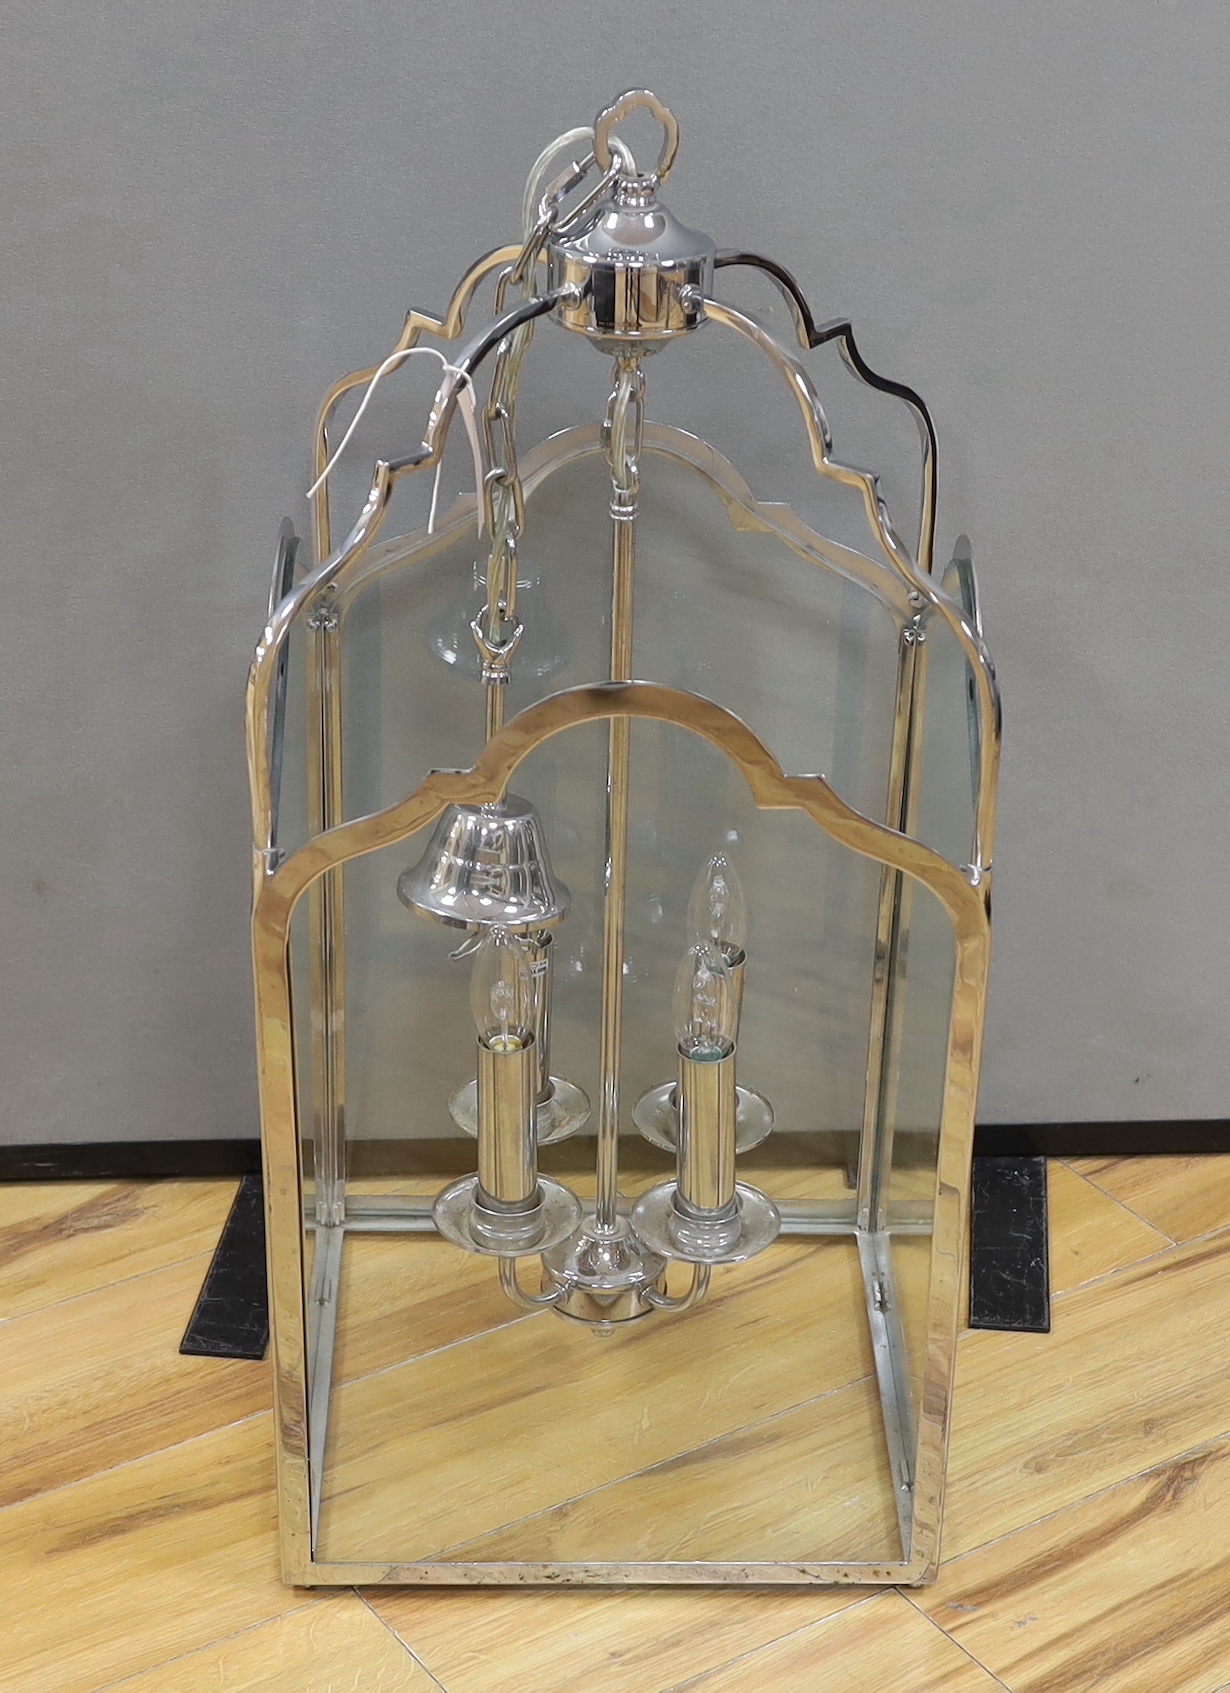 A chromium porch lantern, 76cm high excluding the fitting